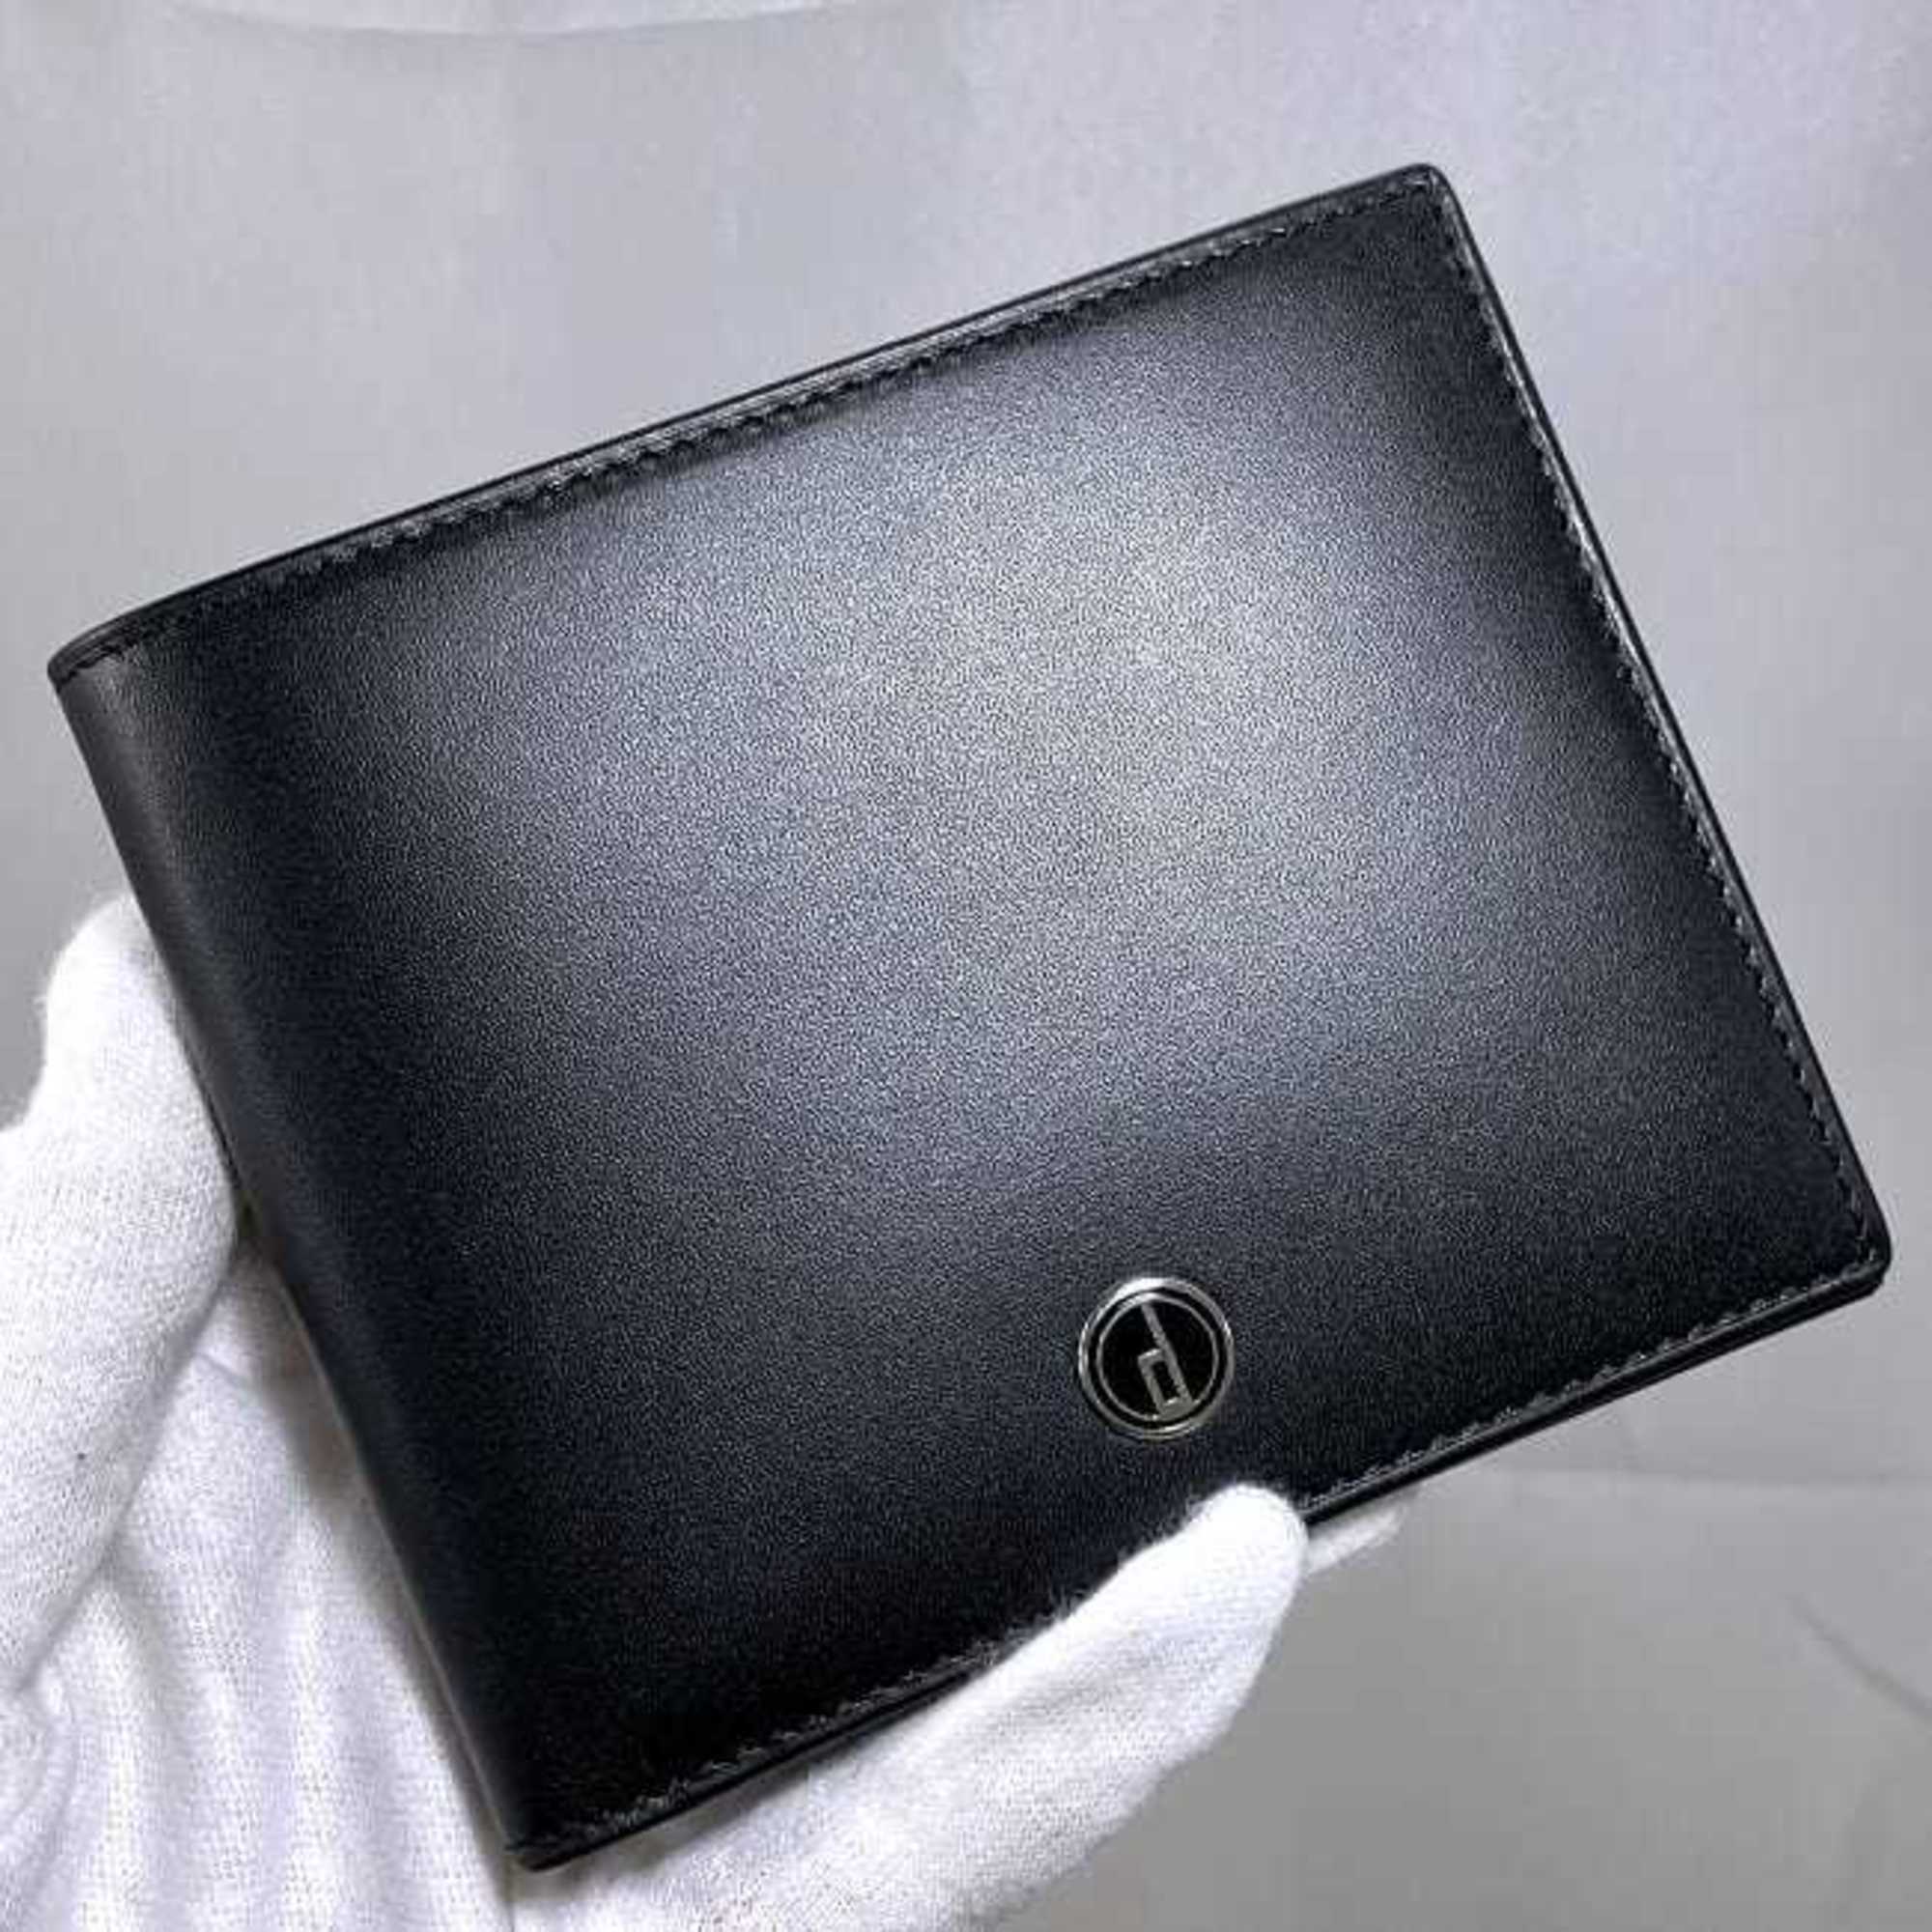 Dunhill Bi-fold Wallet Black LL3070A ec-20092 Leather dunhill Billfold Compact Men's Chic